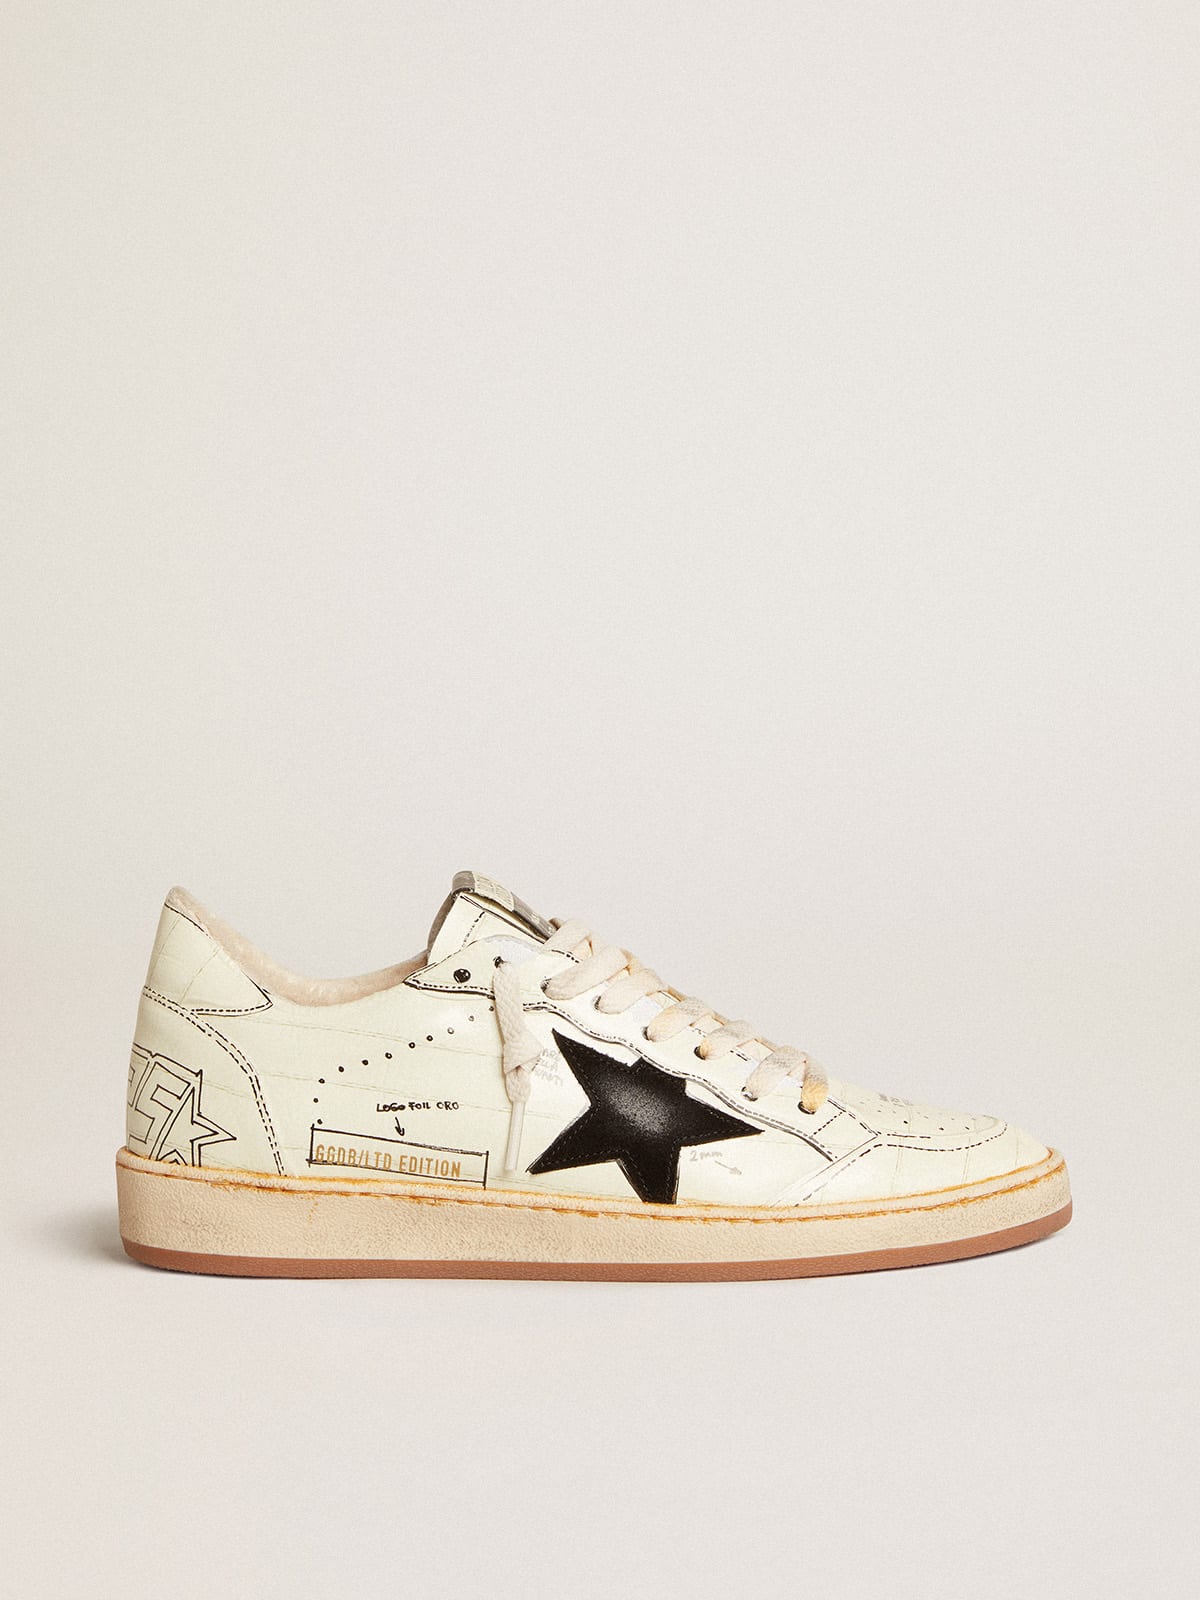 Golden Goose - Ball Star LTD with black suede star and black lettering in 